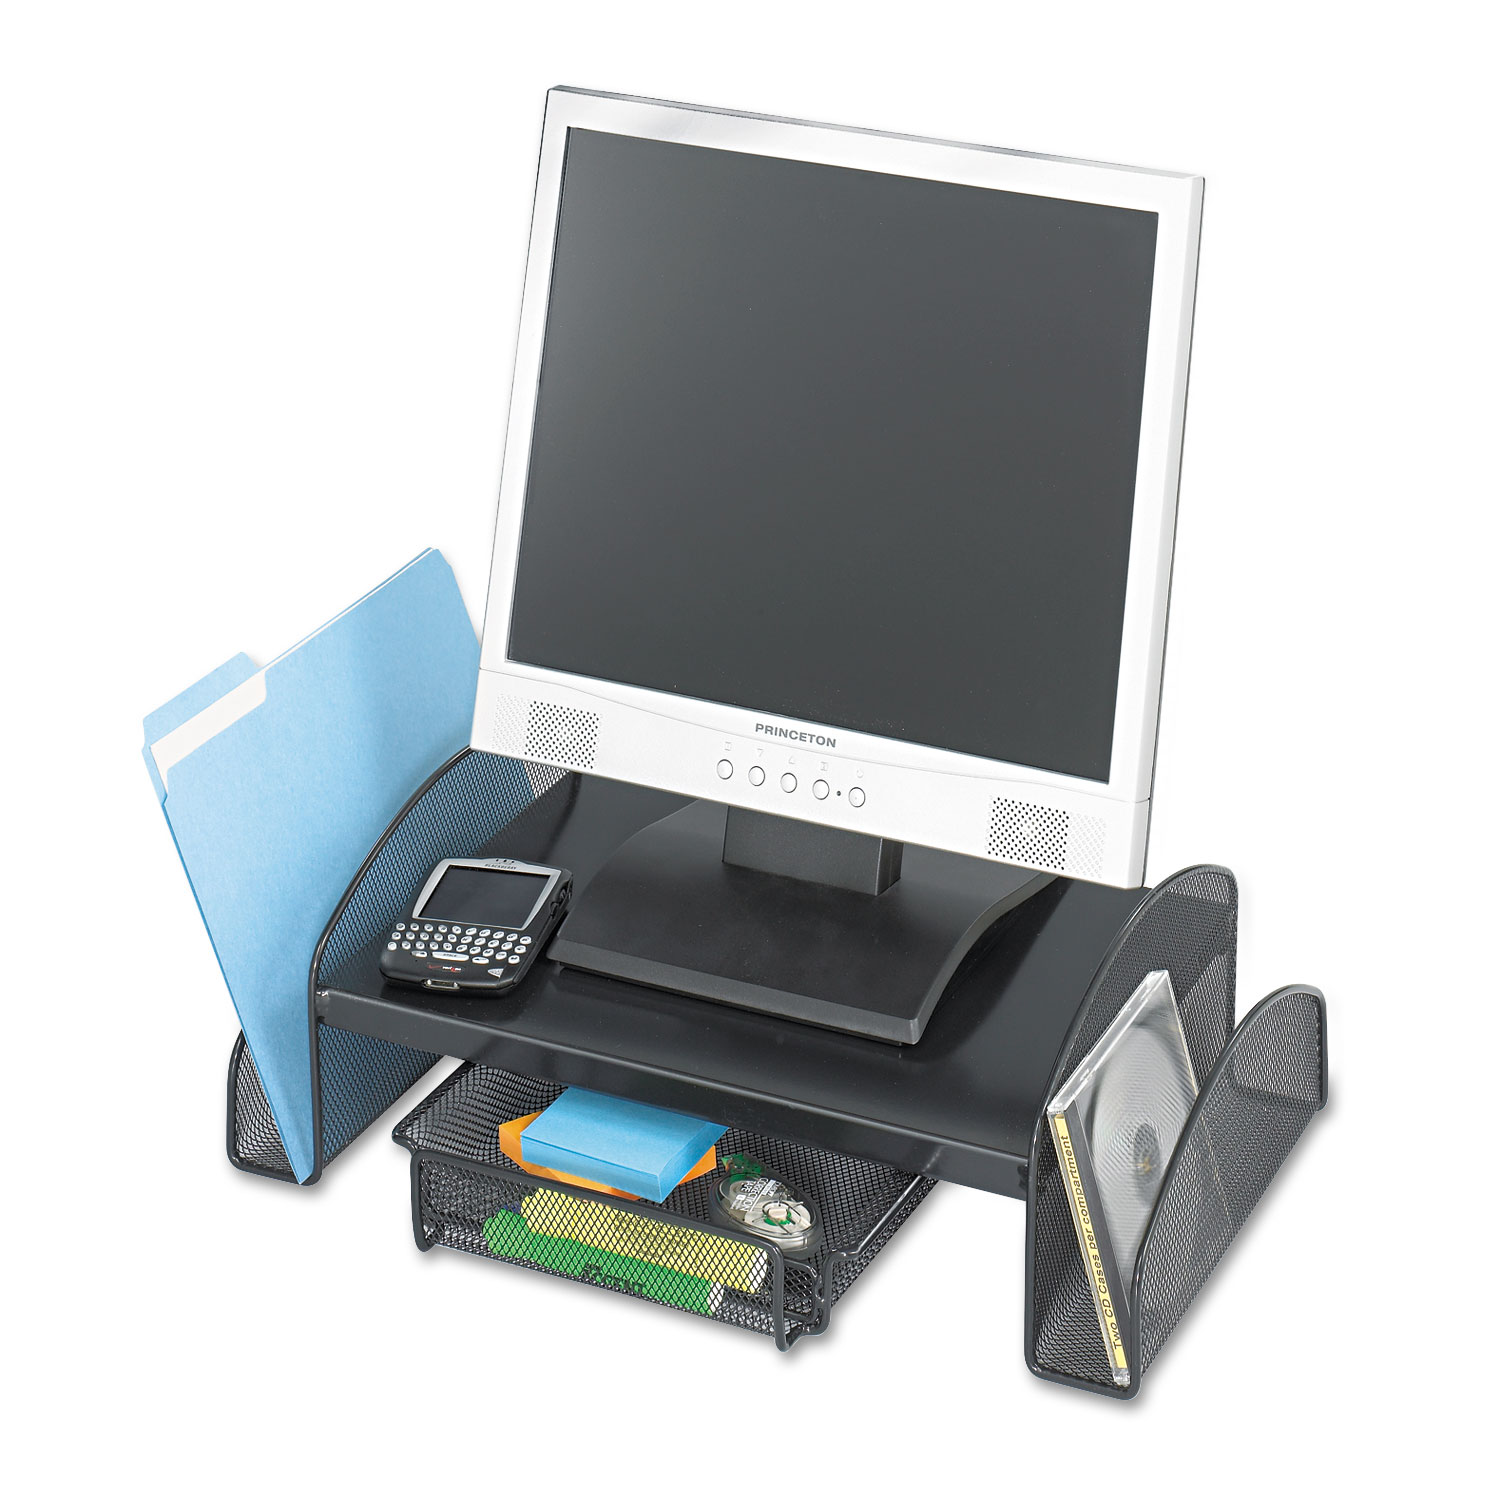 Safco Onyx Mesh Monitor Stand - image 1 of 5